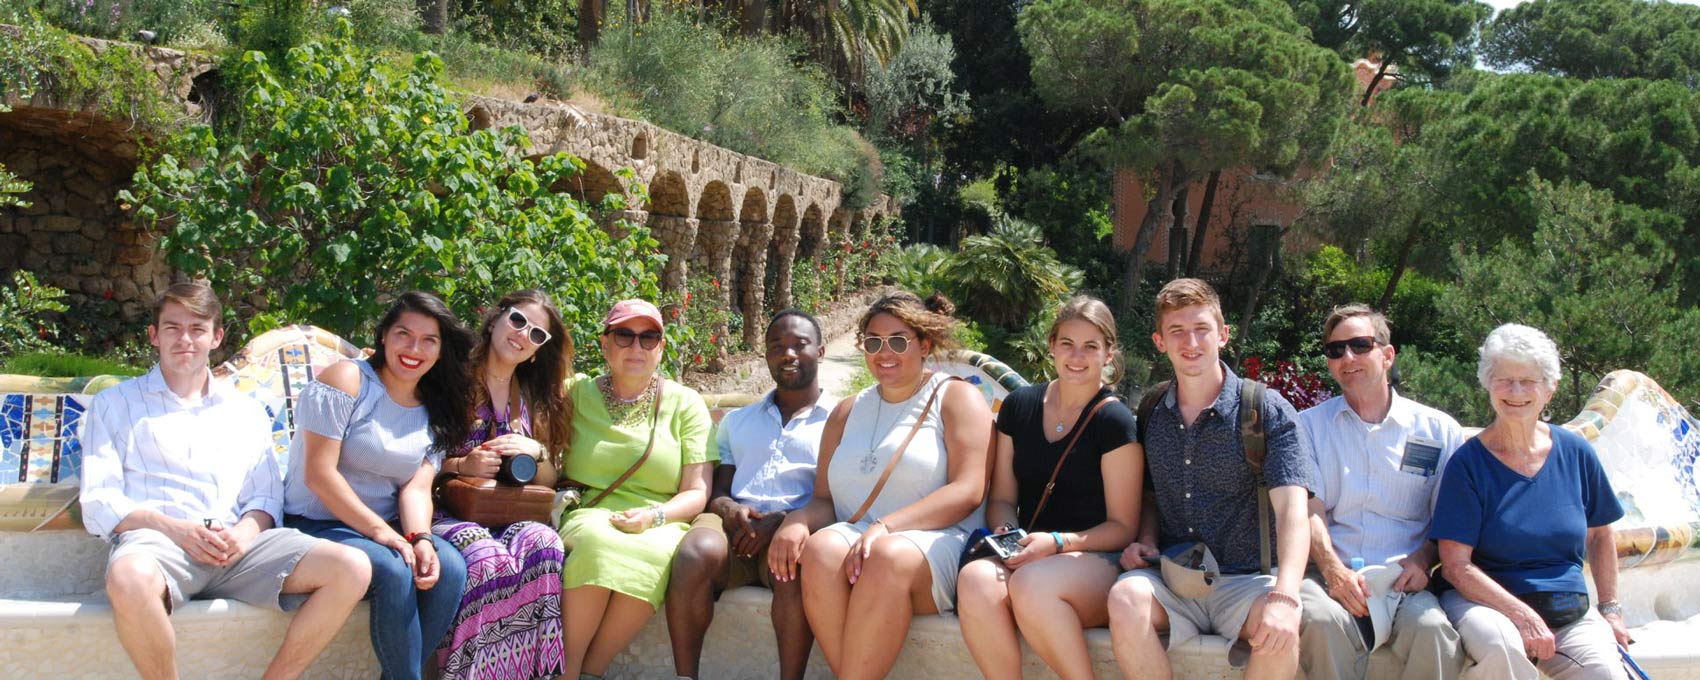 Professor Galina and her students on a class trip enjoying their time in Spain